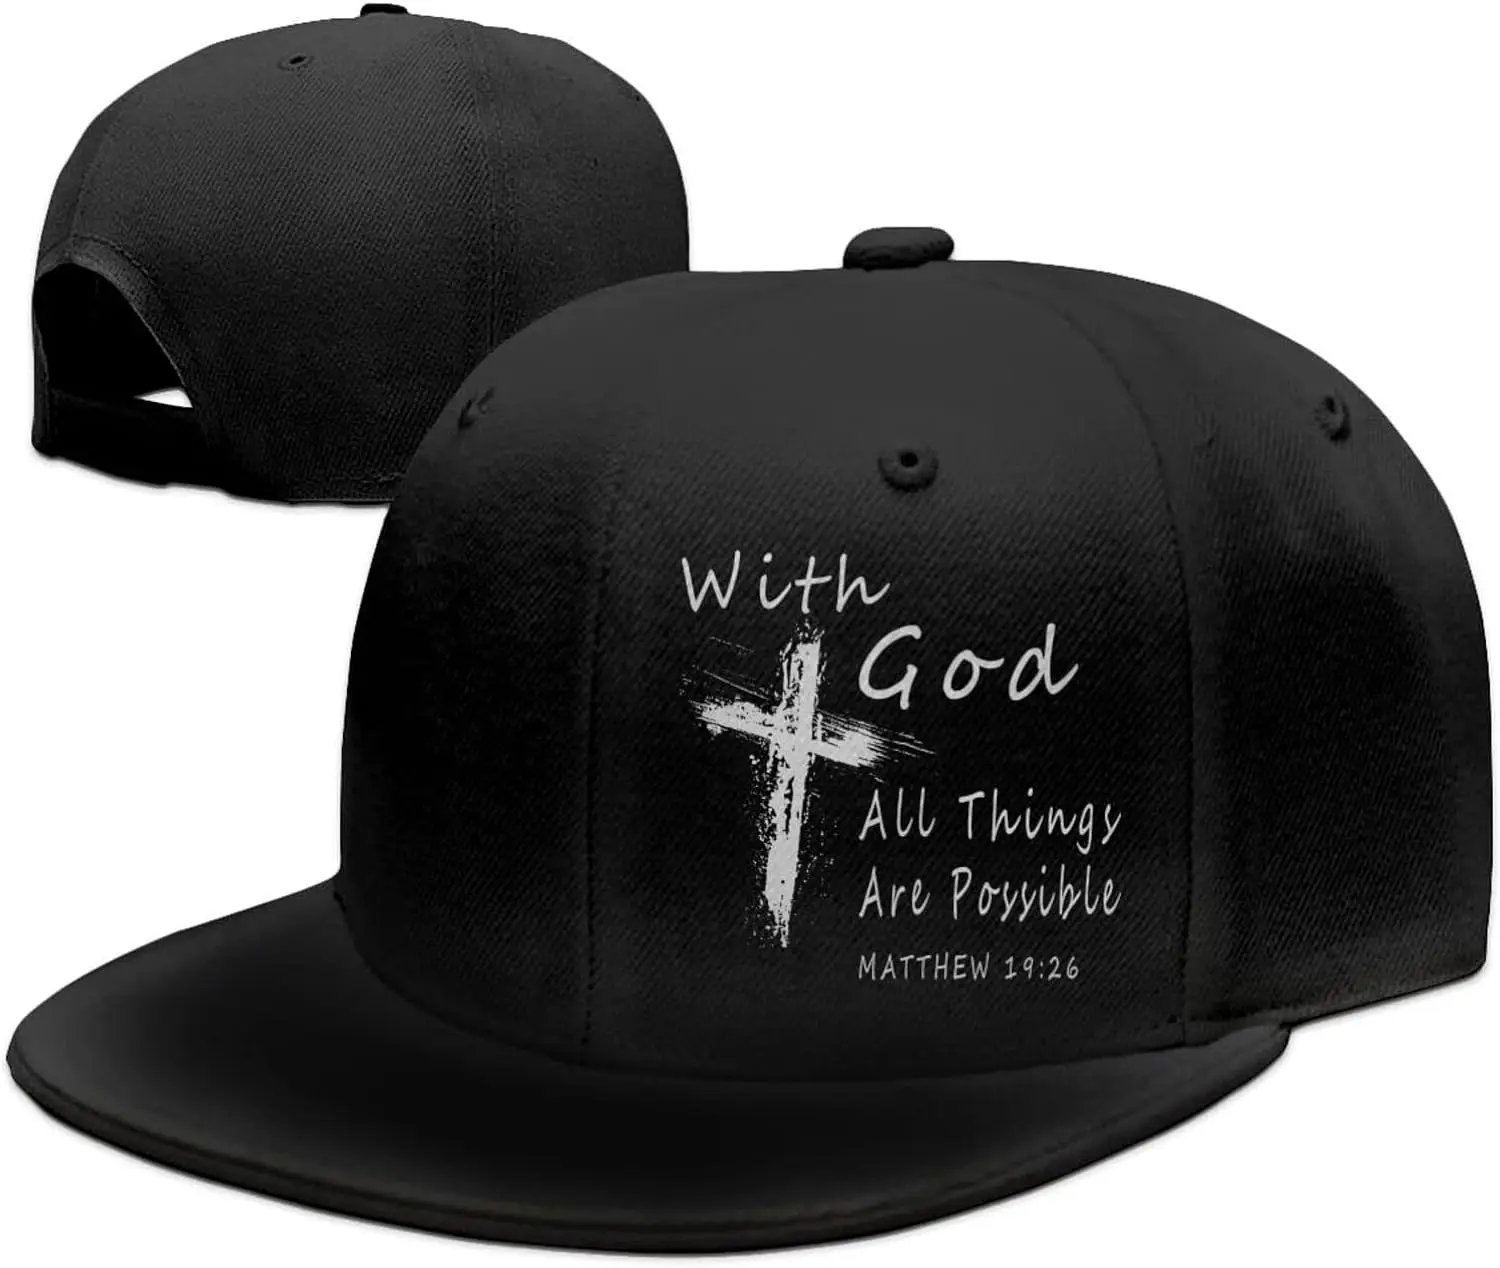 

With God All Things Are Possible Christian Faith Snapback Hats for Men Baseball Cap Adjustable Flat Bill Trucker Dad Gift